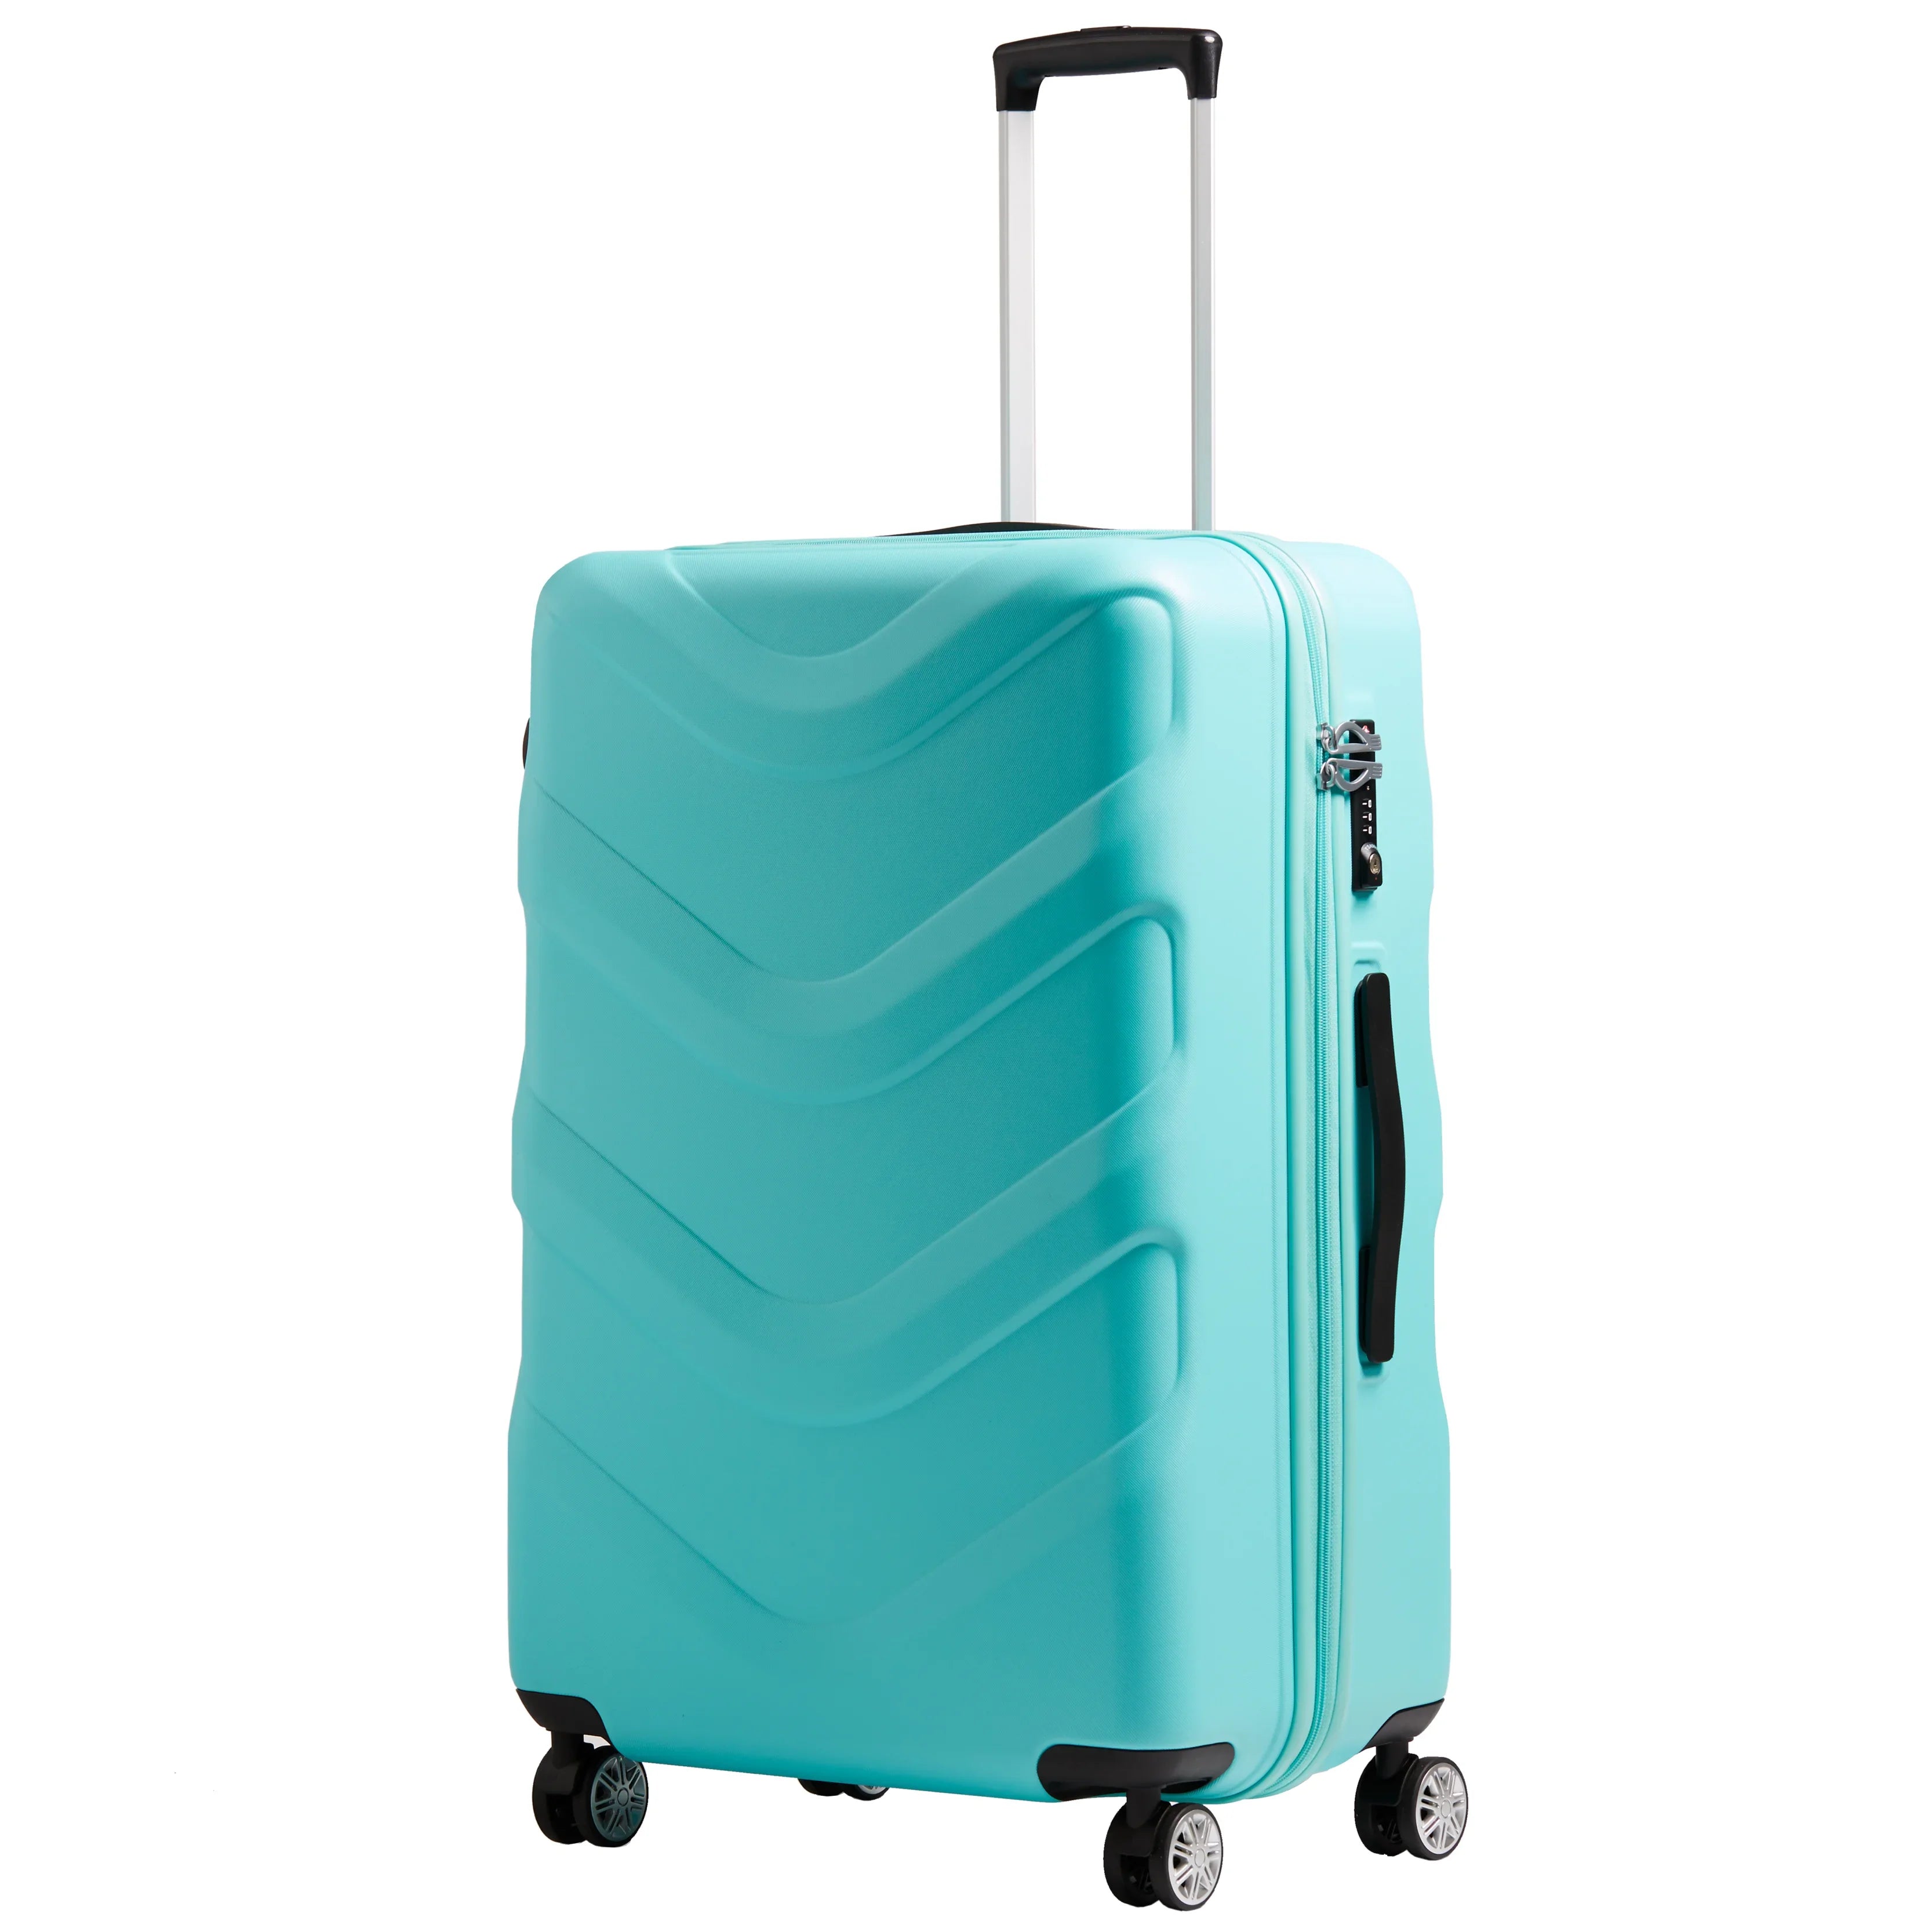 Stratic Arrow 2 trolley 4 roues 76 cm - Turquoise